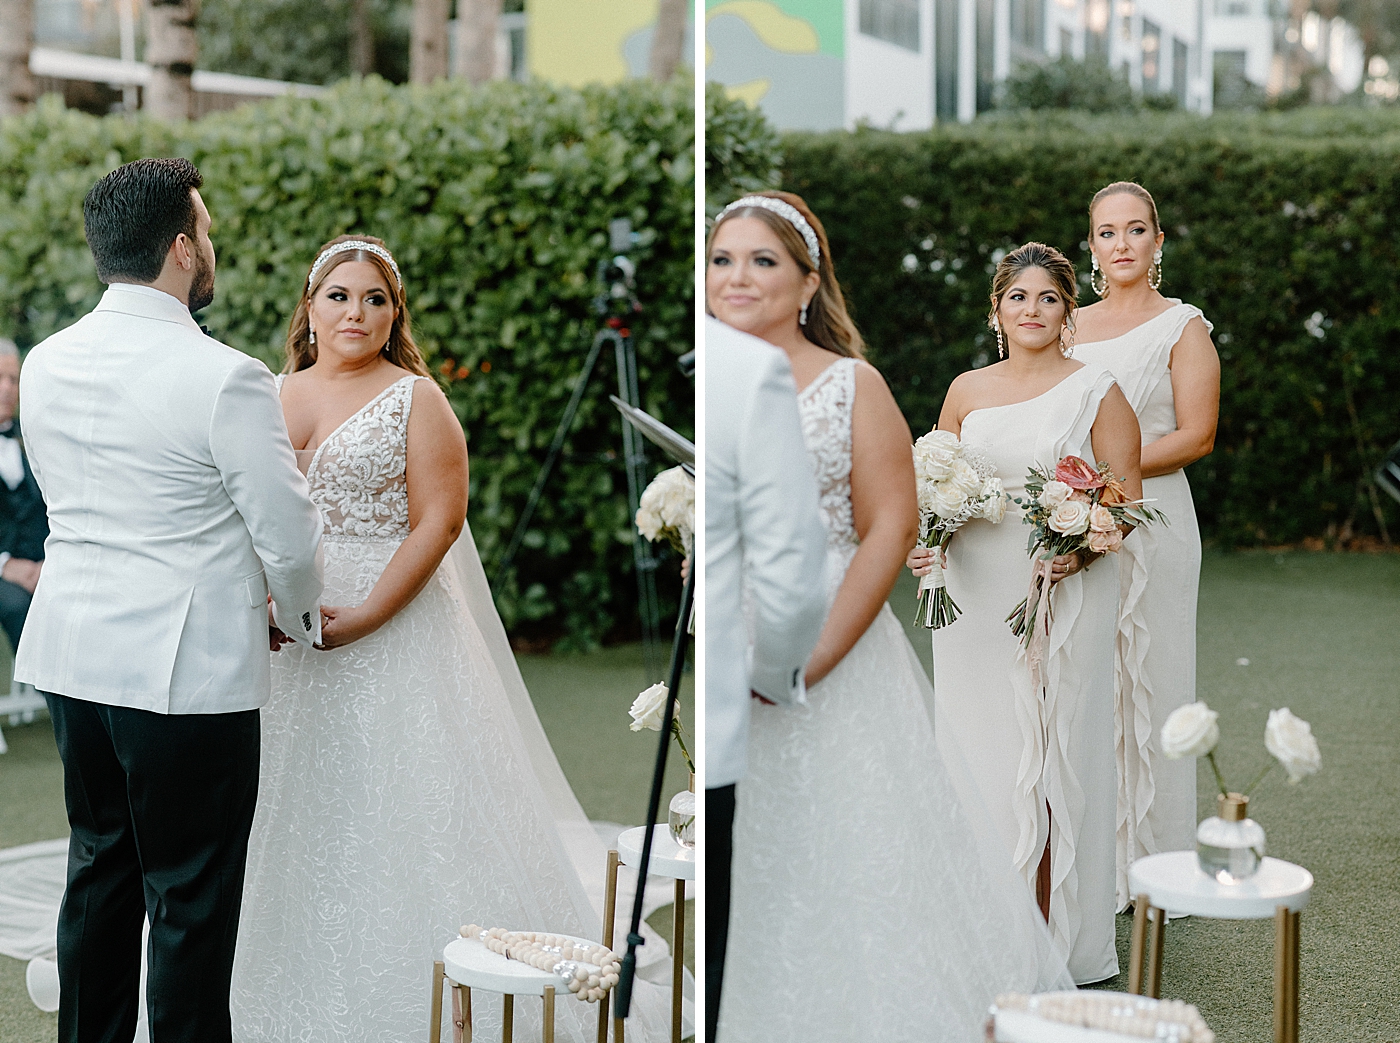 Ceremony homily with Bride and Groom holding hands and Bridesmaids watching Modern Elegant Wedding at The W South Beach captured by South Florida Wedding Photographer Erika Tuesta Photography